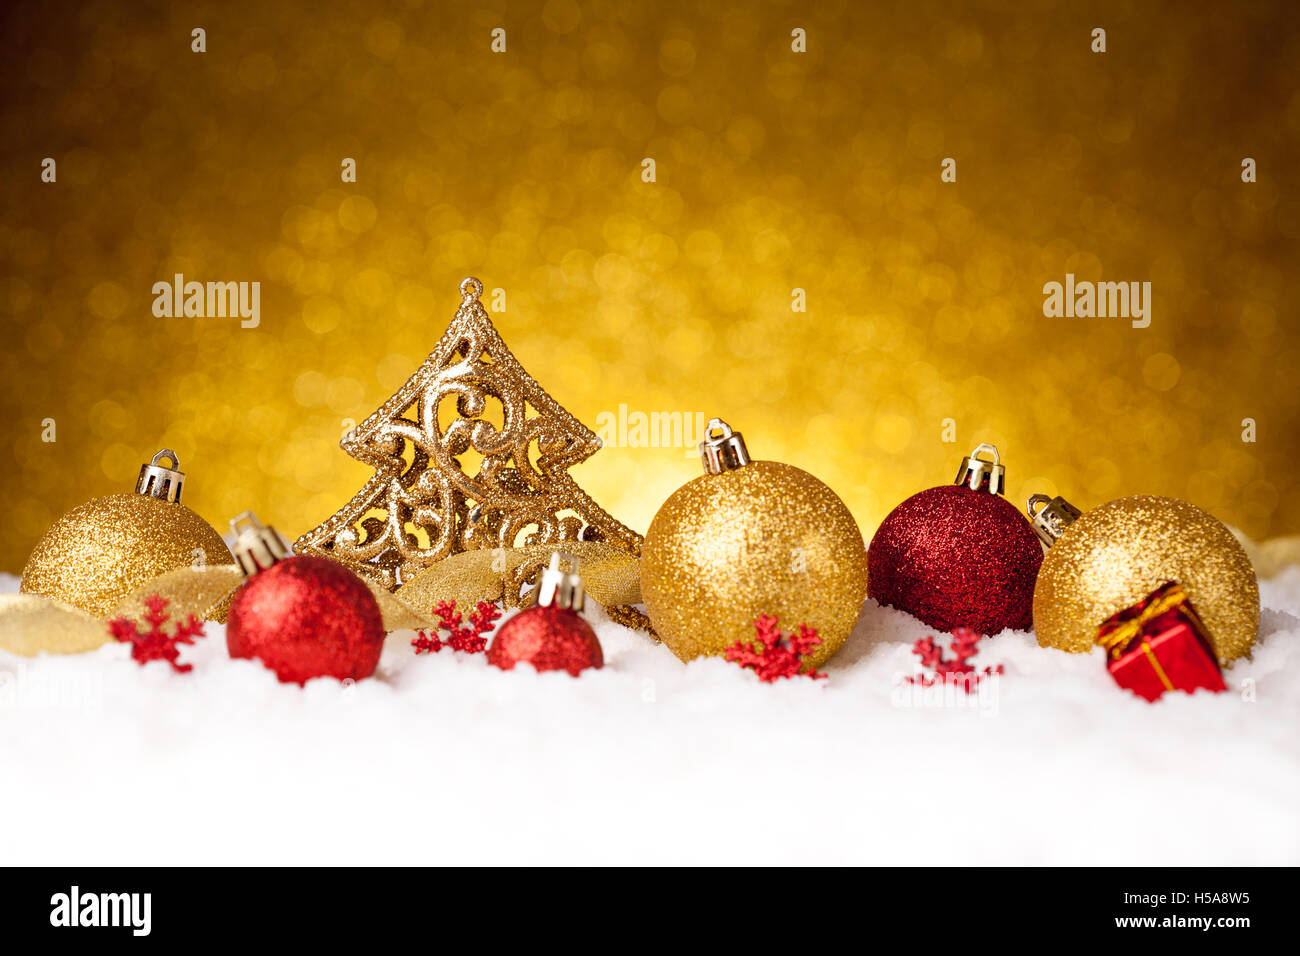 Golden christmas fir tree decoration with gold and red ornaments Stock Photo